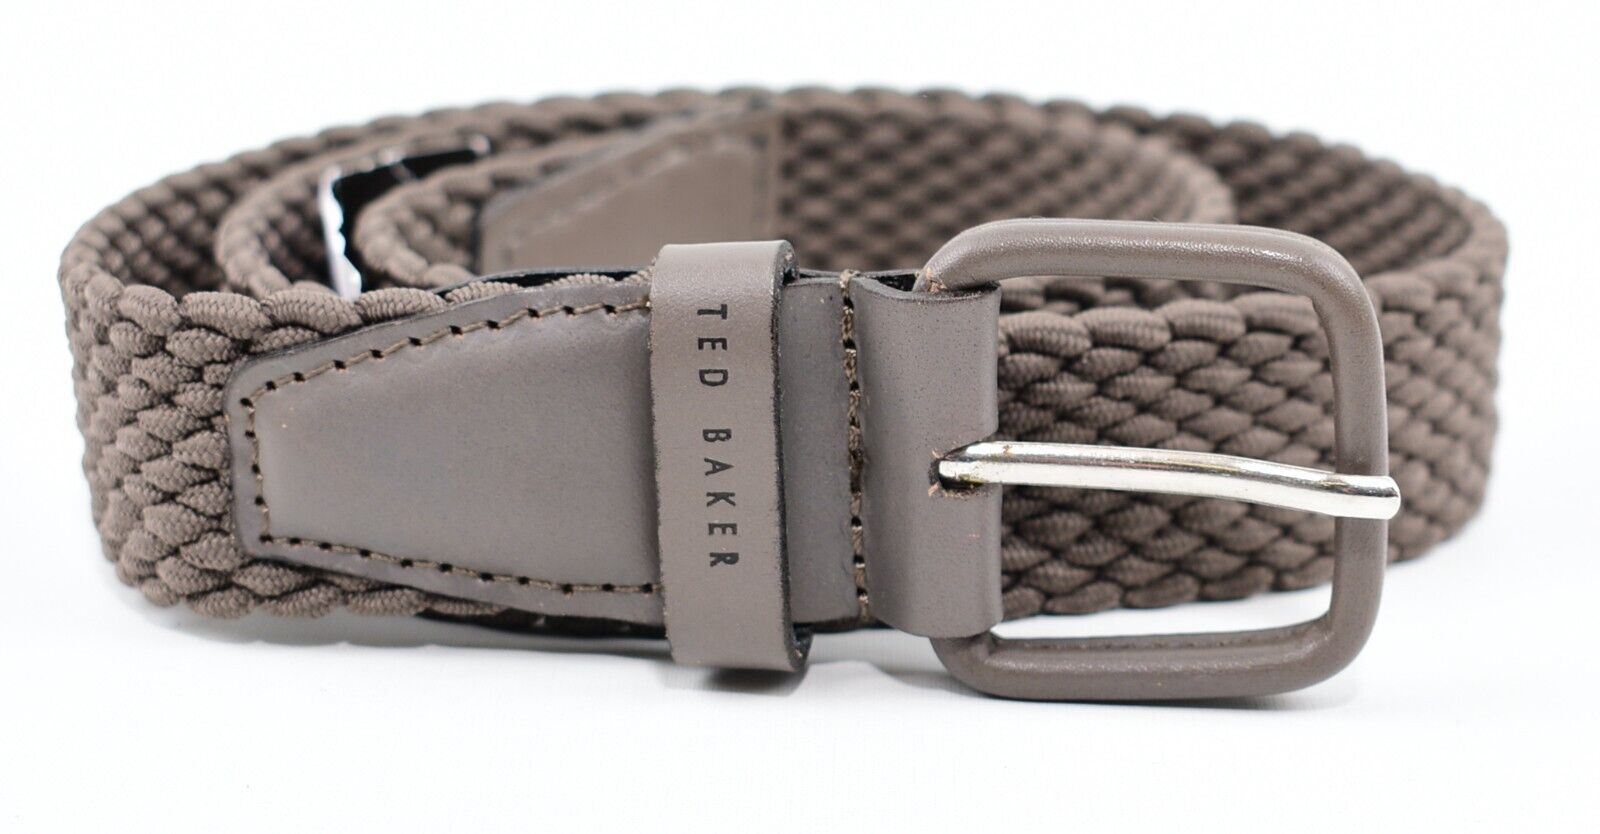 TED BAKER Mens ALBEA Woven Elastic Belt, Taupe, size S-M